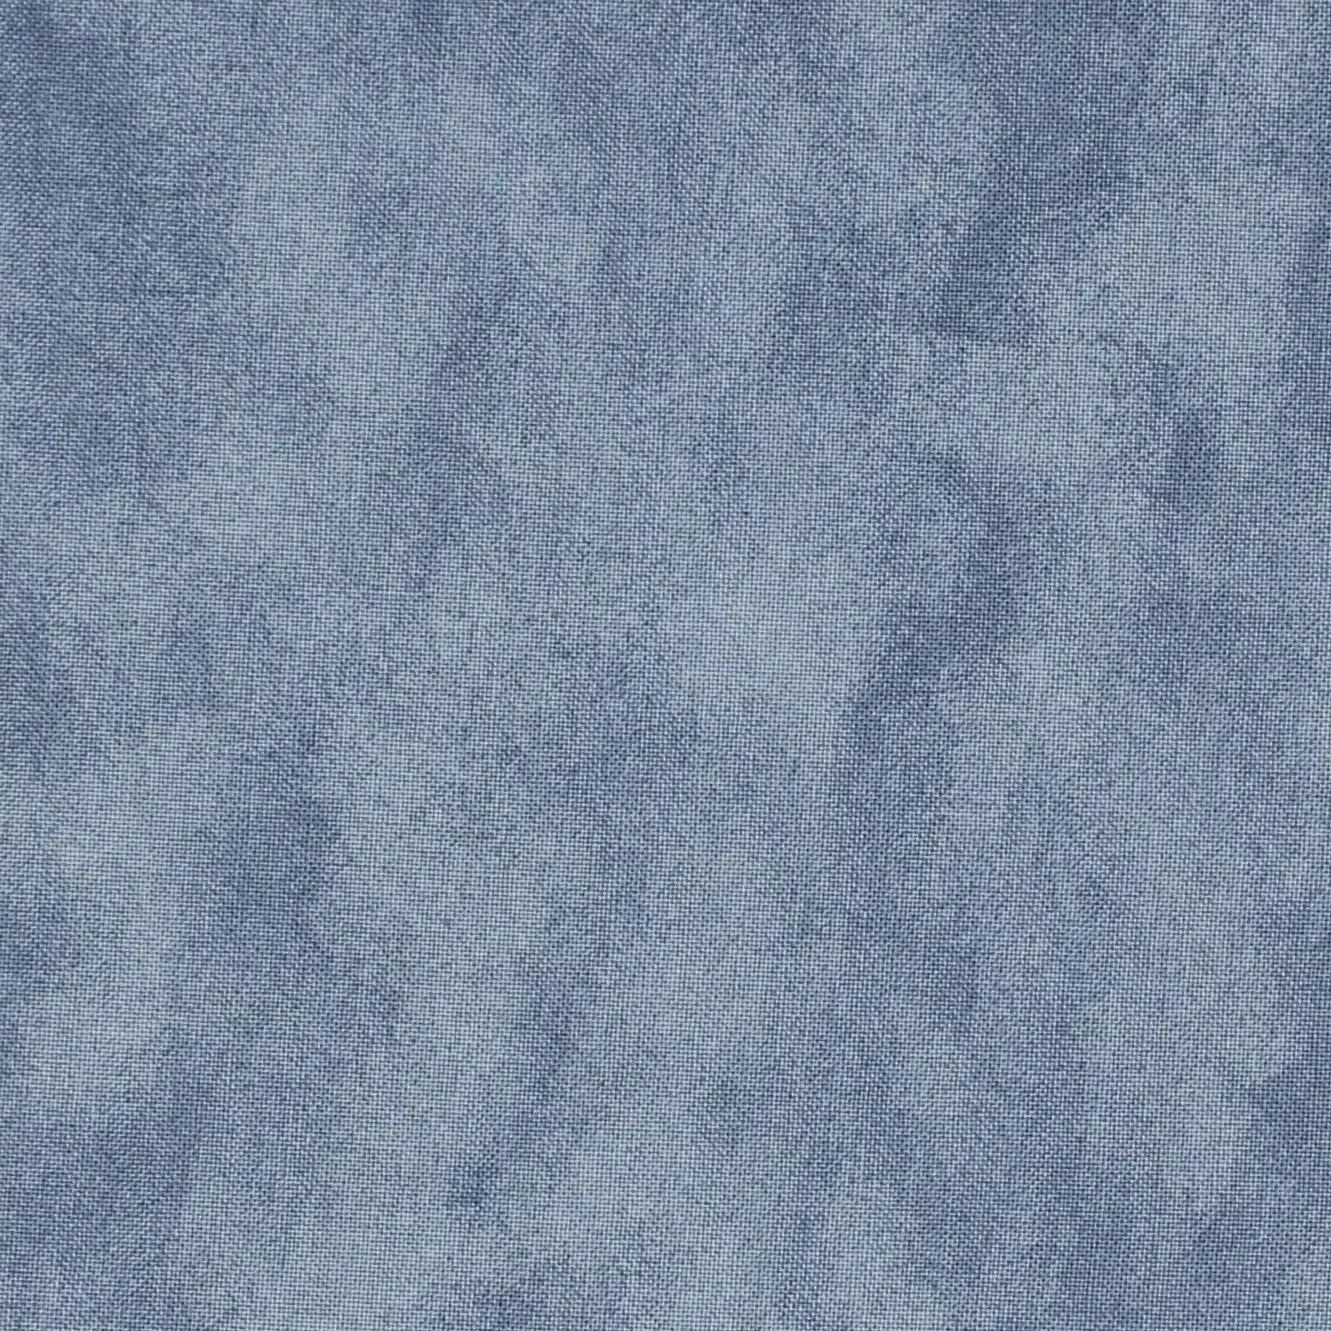 Grey Dark Color Waves Cotton Wideback Fabric ( 1 Yard Pack ) - Linda's Electric Quilters